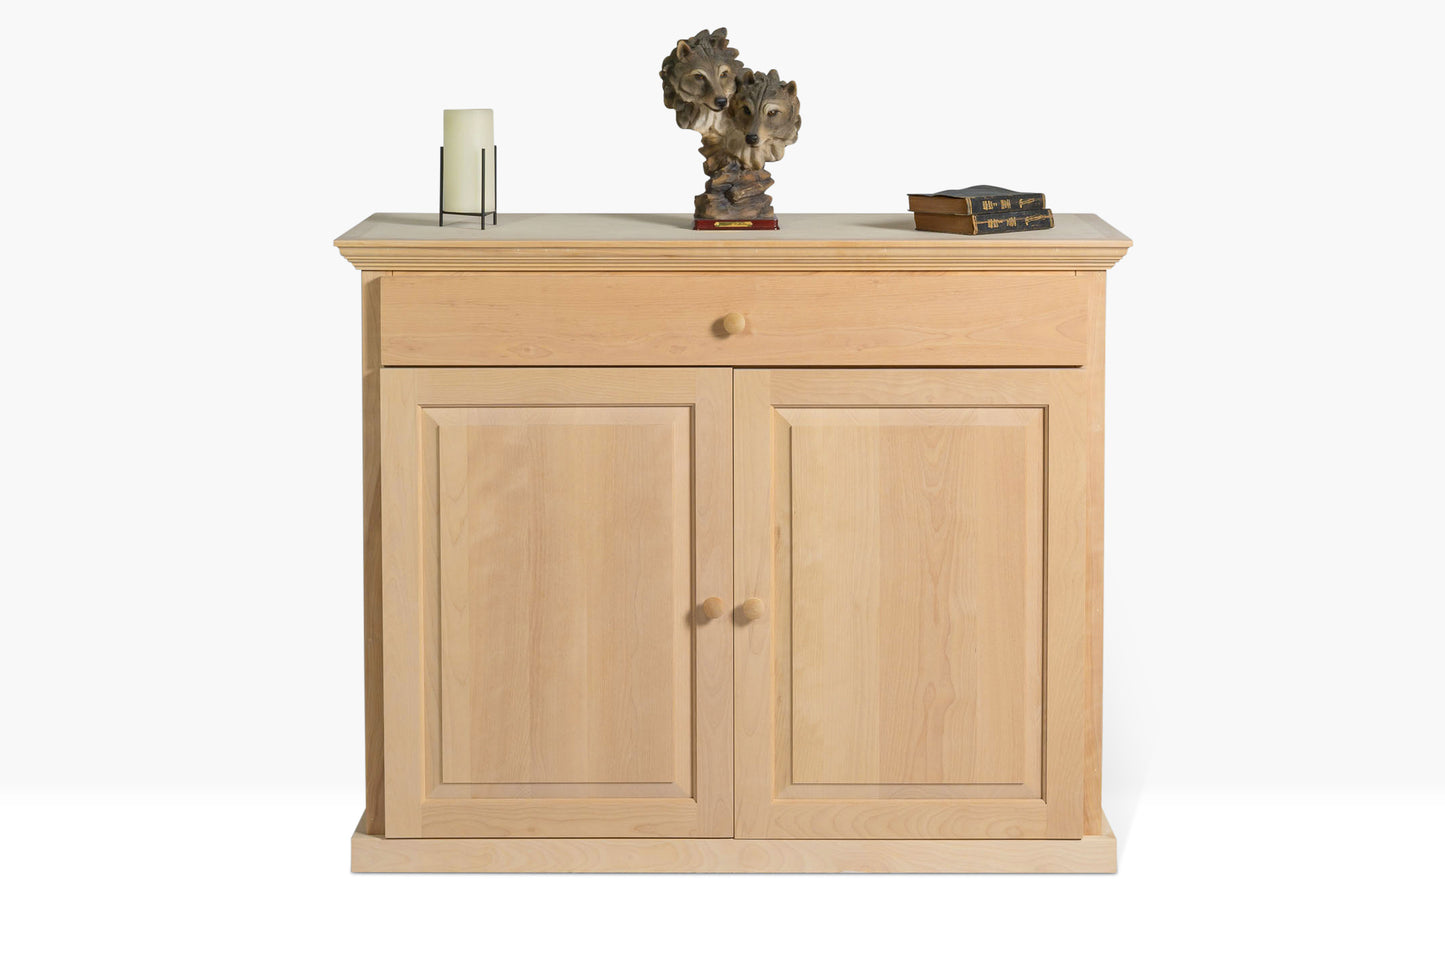 Berkshire Dover Cabinet with Drawer built in birch with adjustable shelving and one drawer. Shown unfinished.